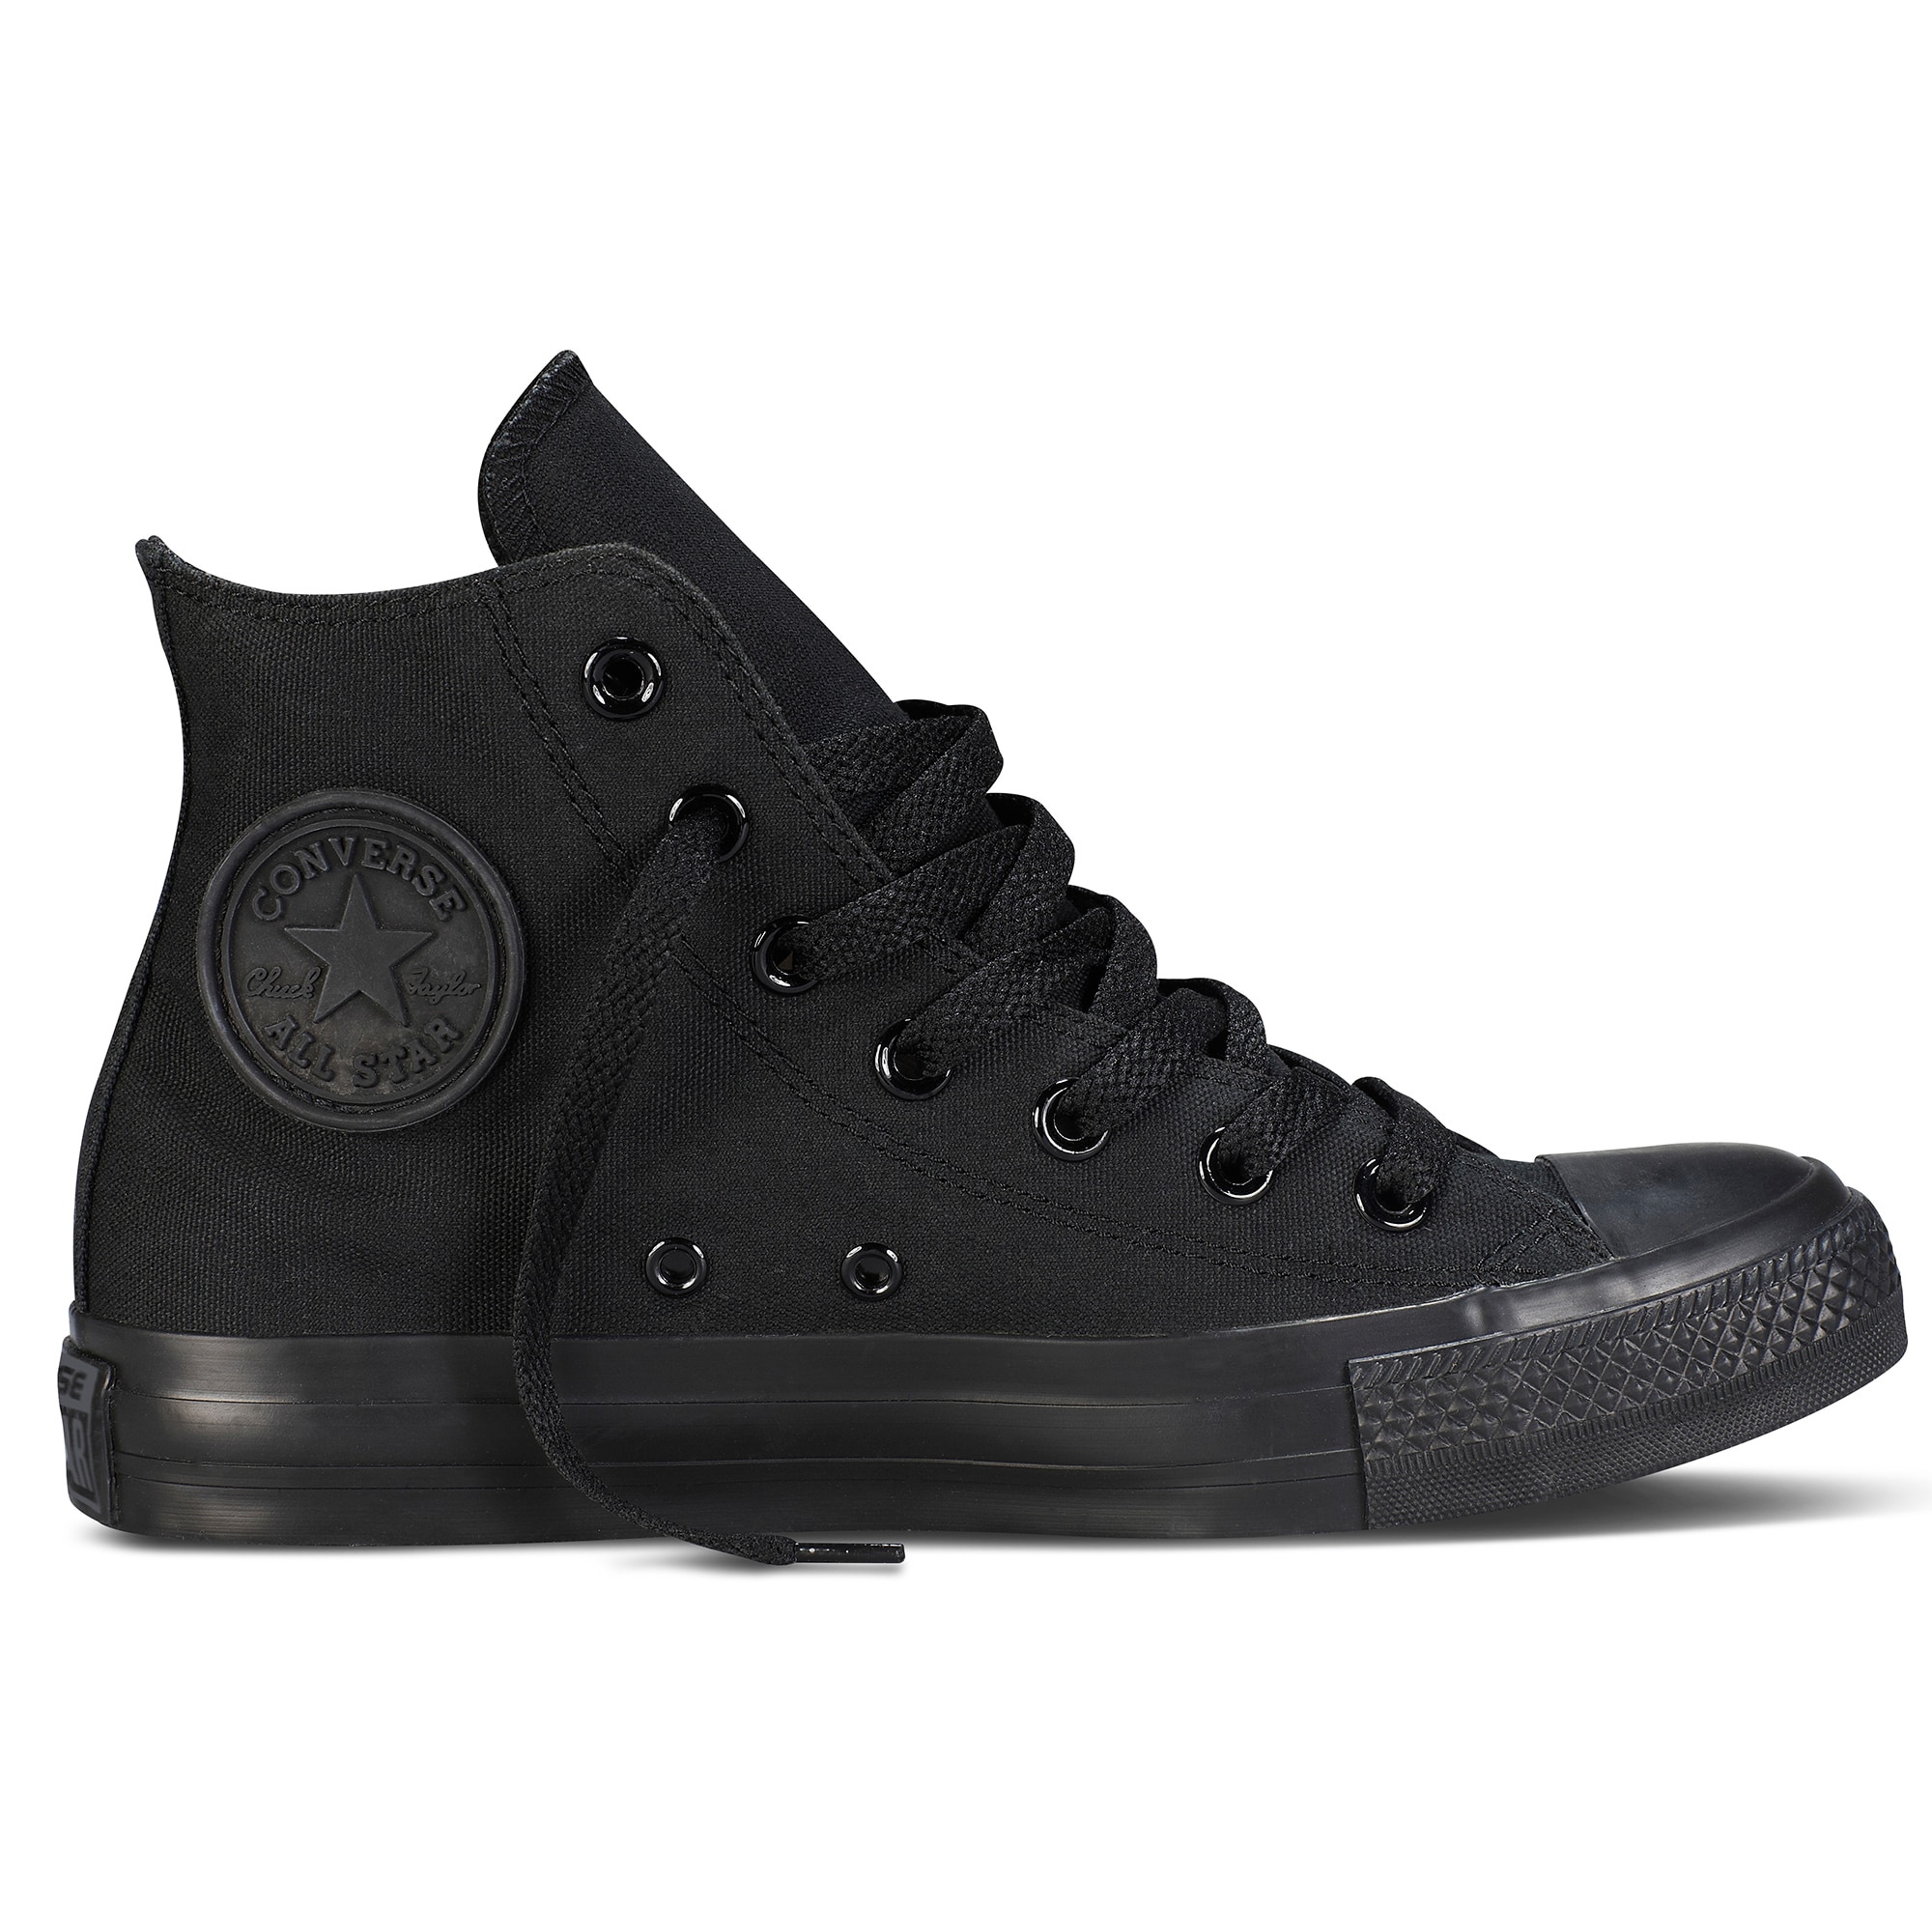 page charter stress Tenisi Converse Chuck Taylor AS Core HI Unisex, Black, Negru, 41.5 - eMAG.ro